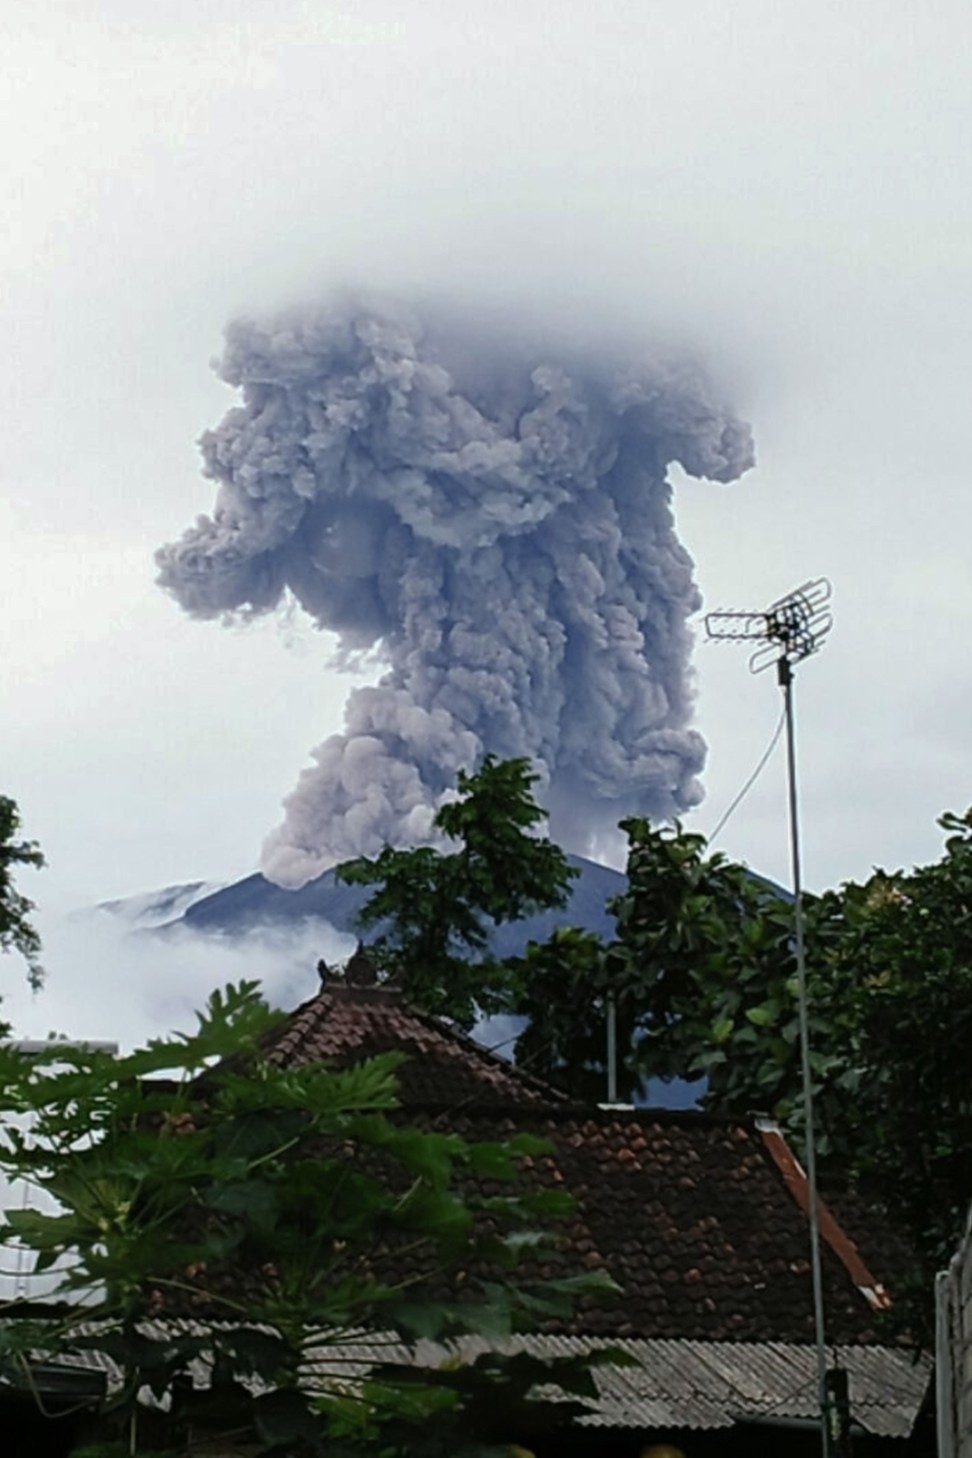 Bali’s ‘highly intense’ volcano erupts again, spewing ash 2.5km into